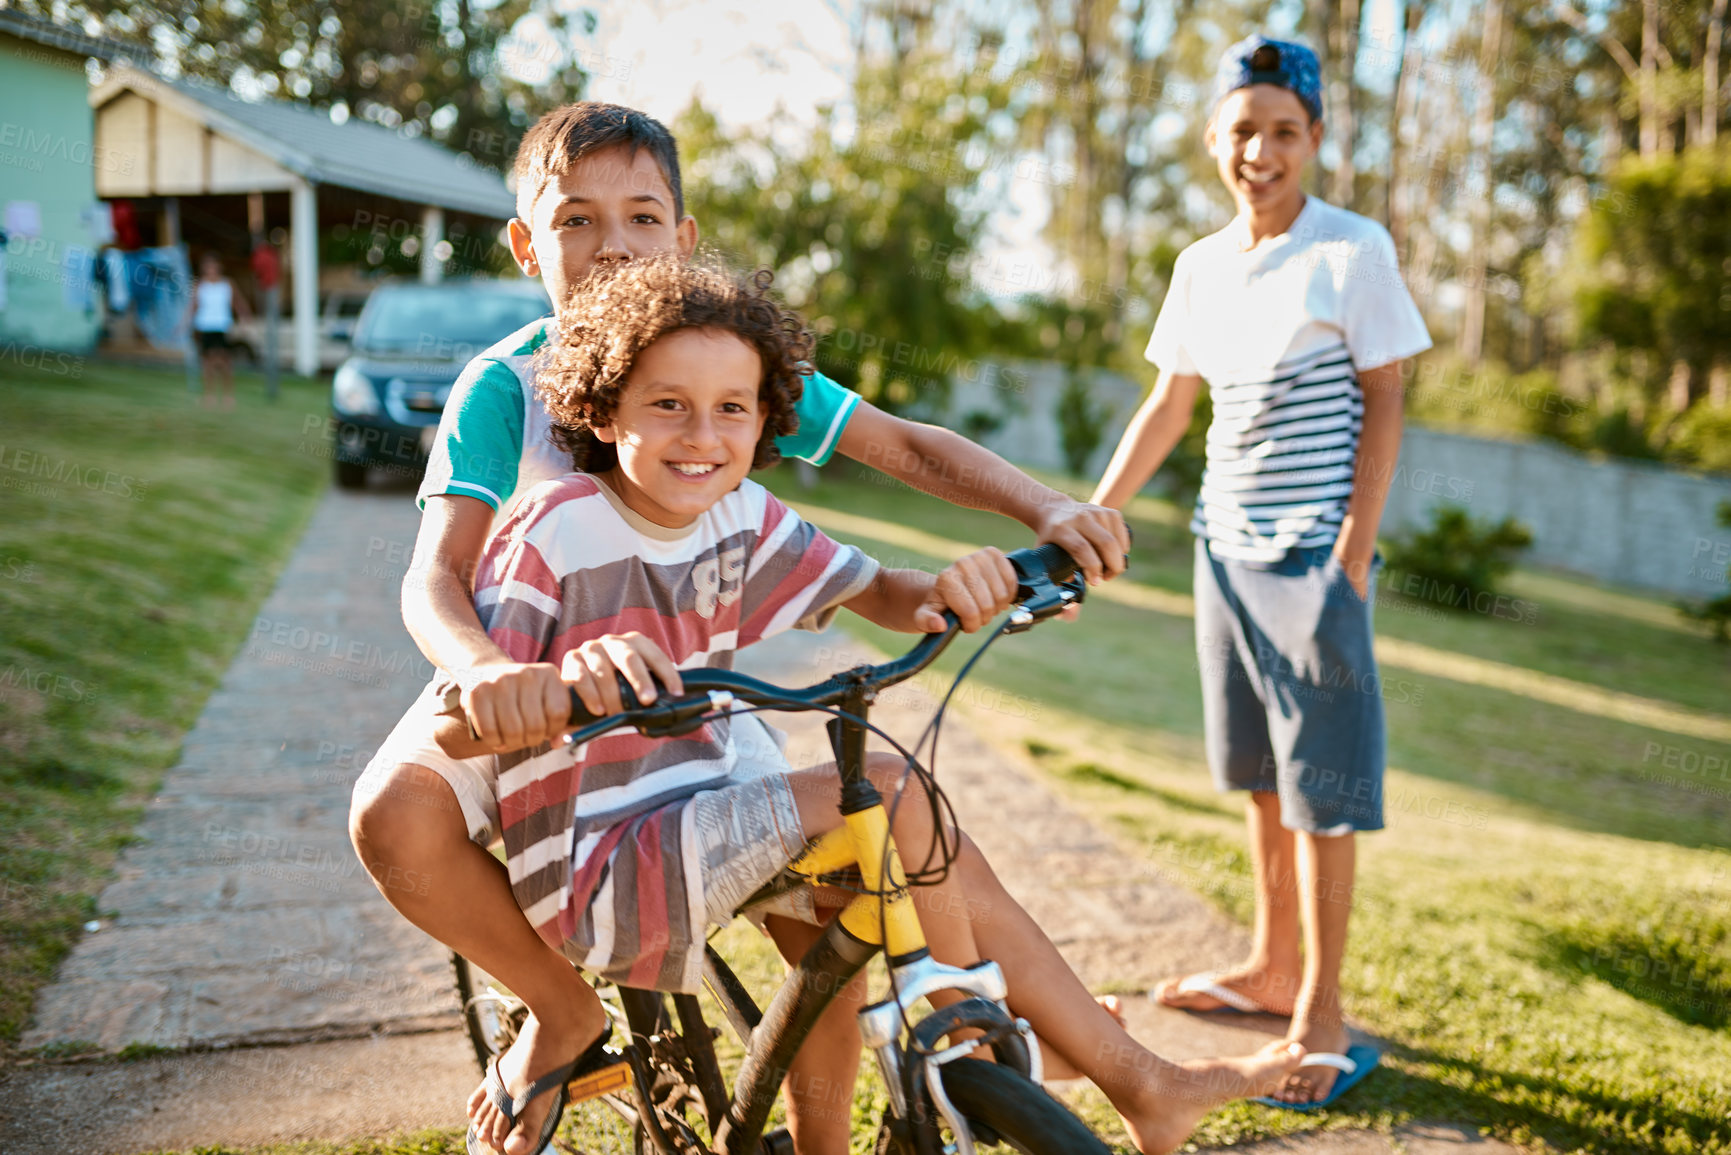 Buy stock photo Shot of happy young brothers riding a bicycle together in their backyard